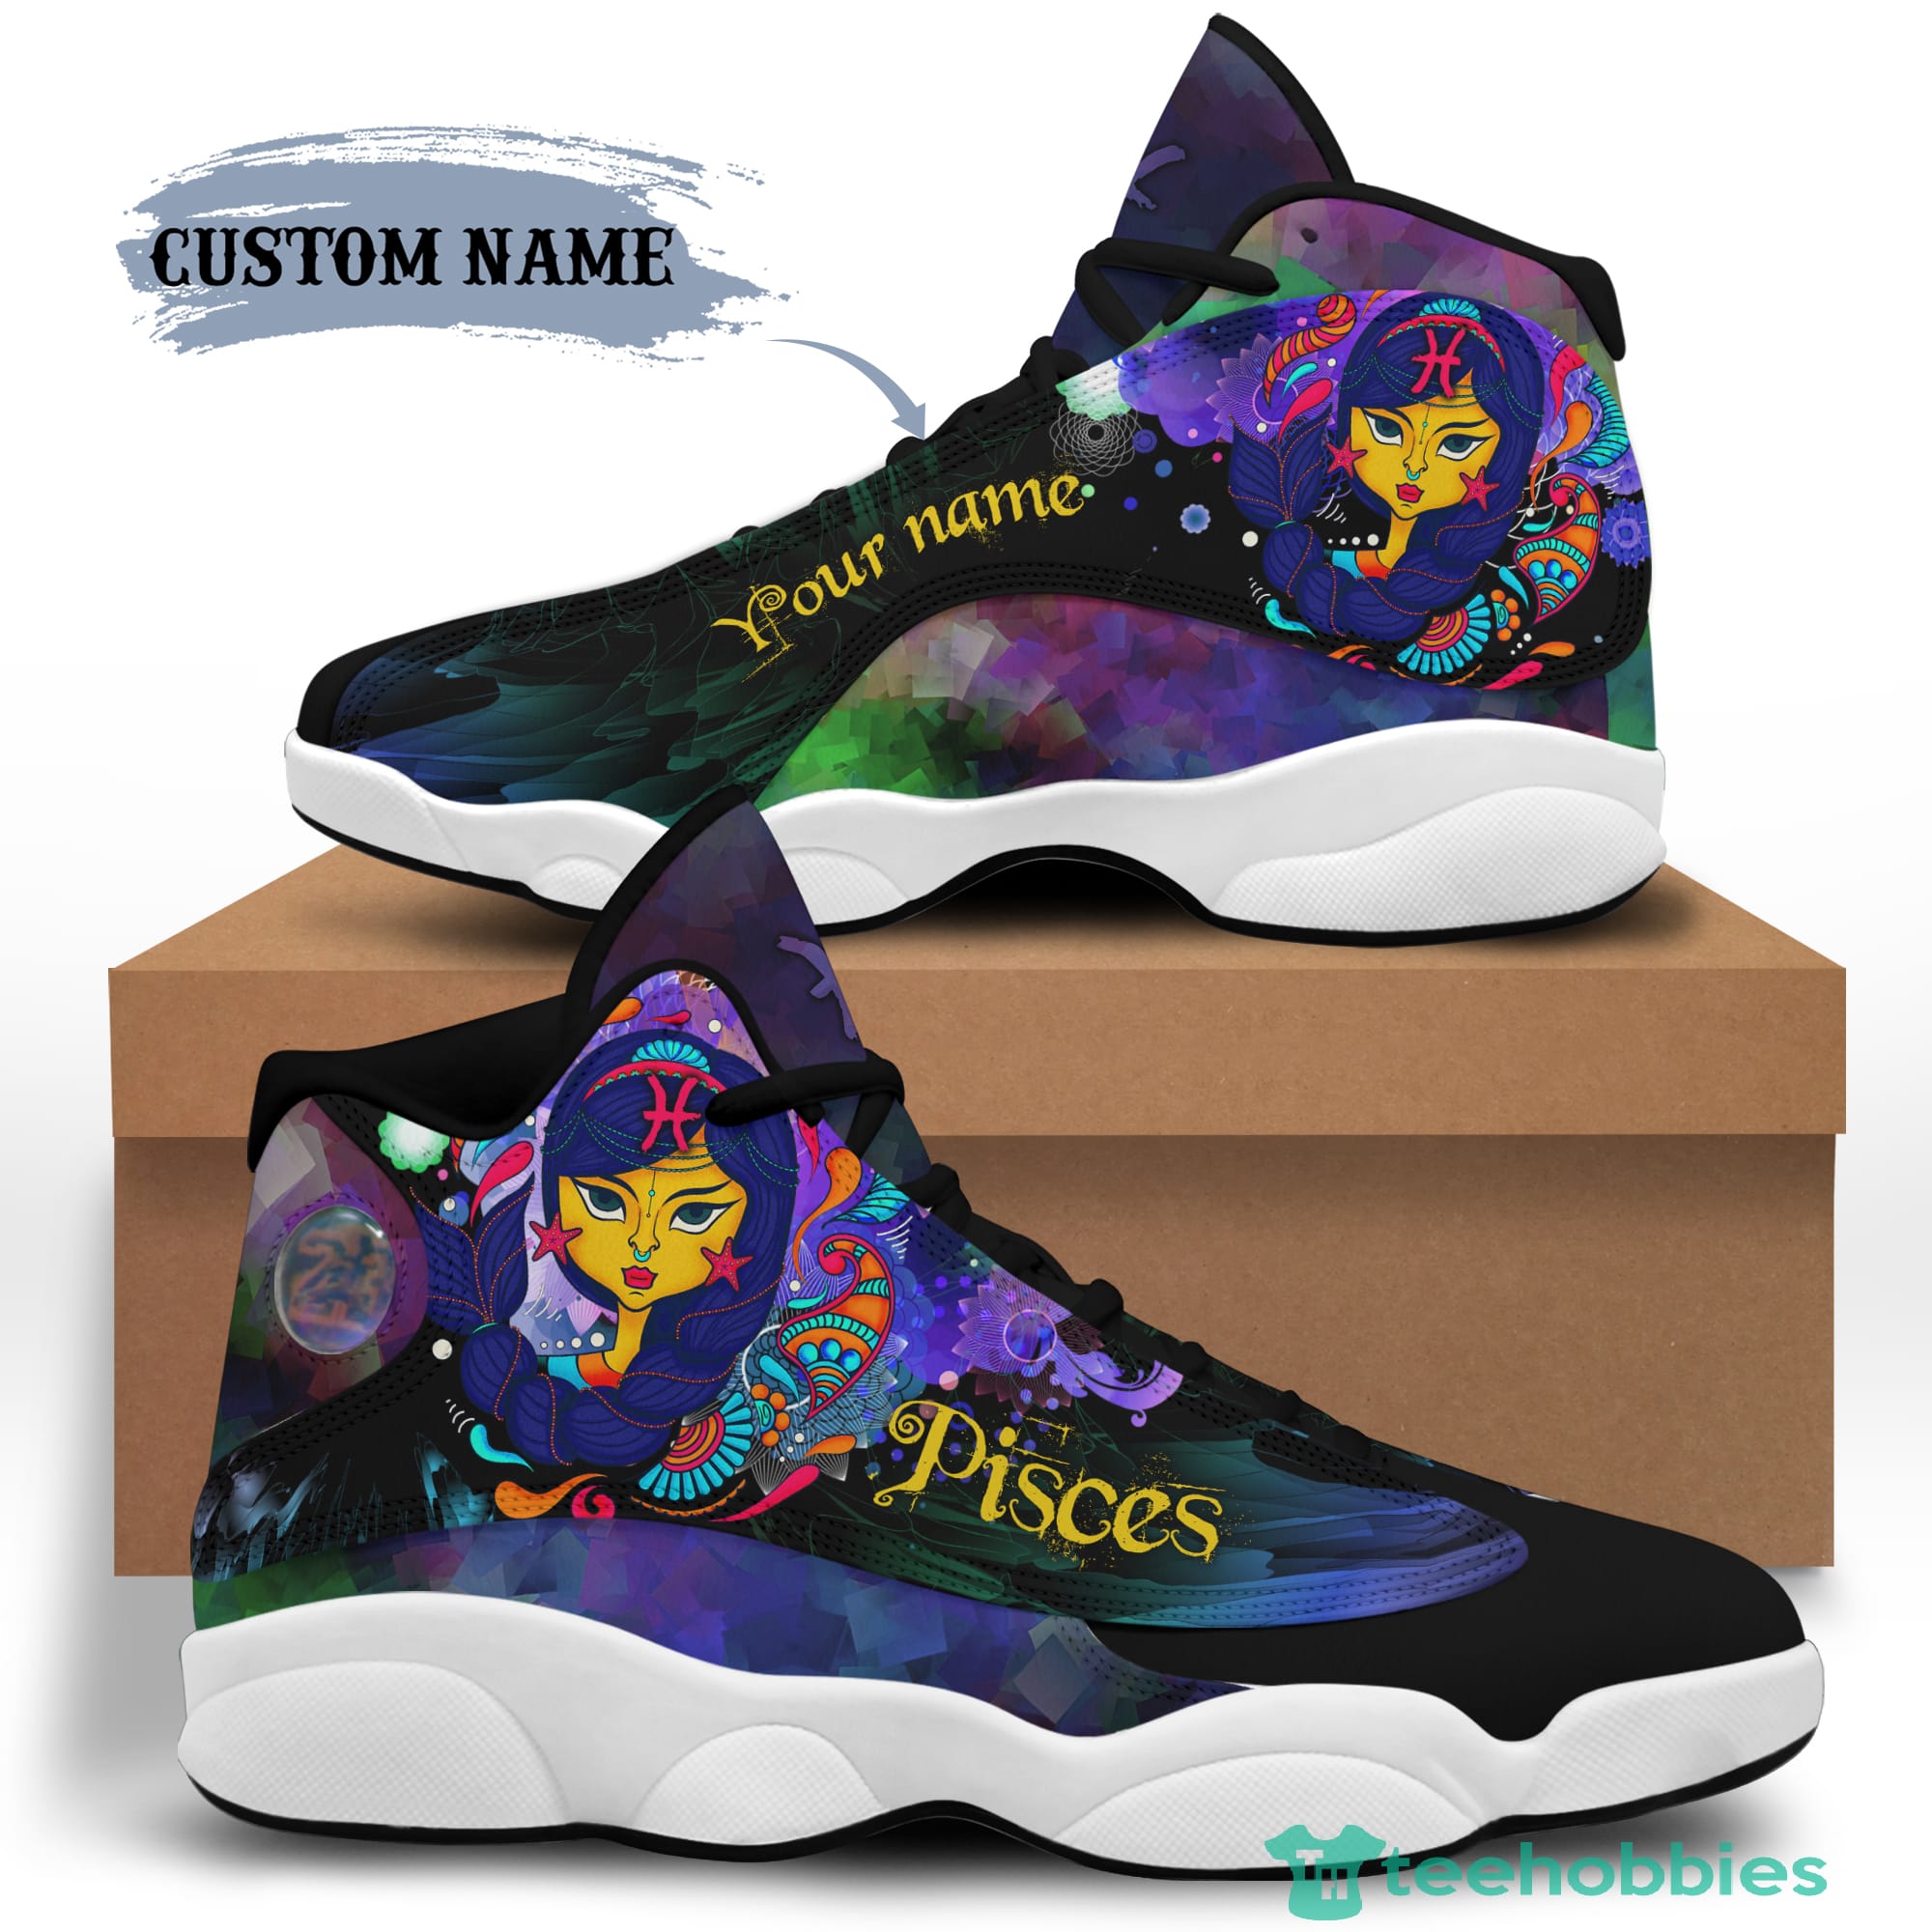 Pisces Birthday Gift Personalized Name Air Jordan 13 Shoes SKU89